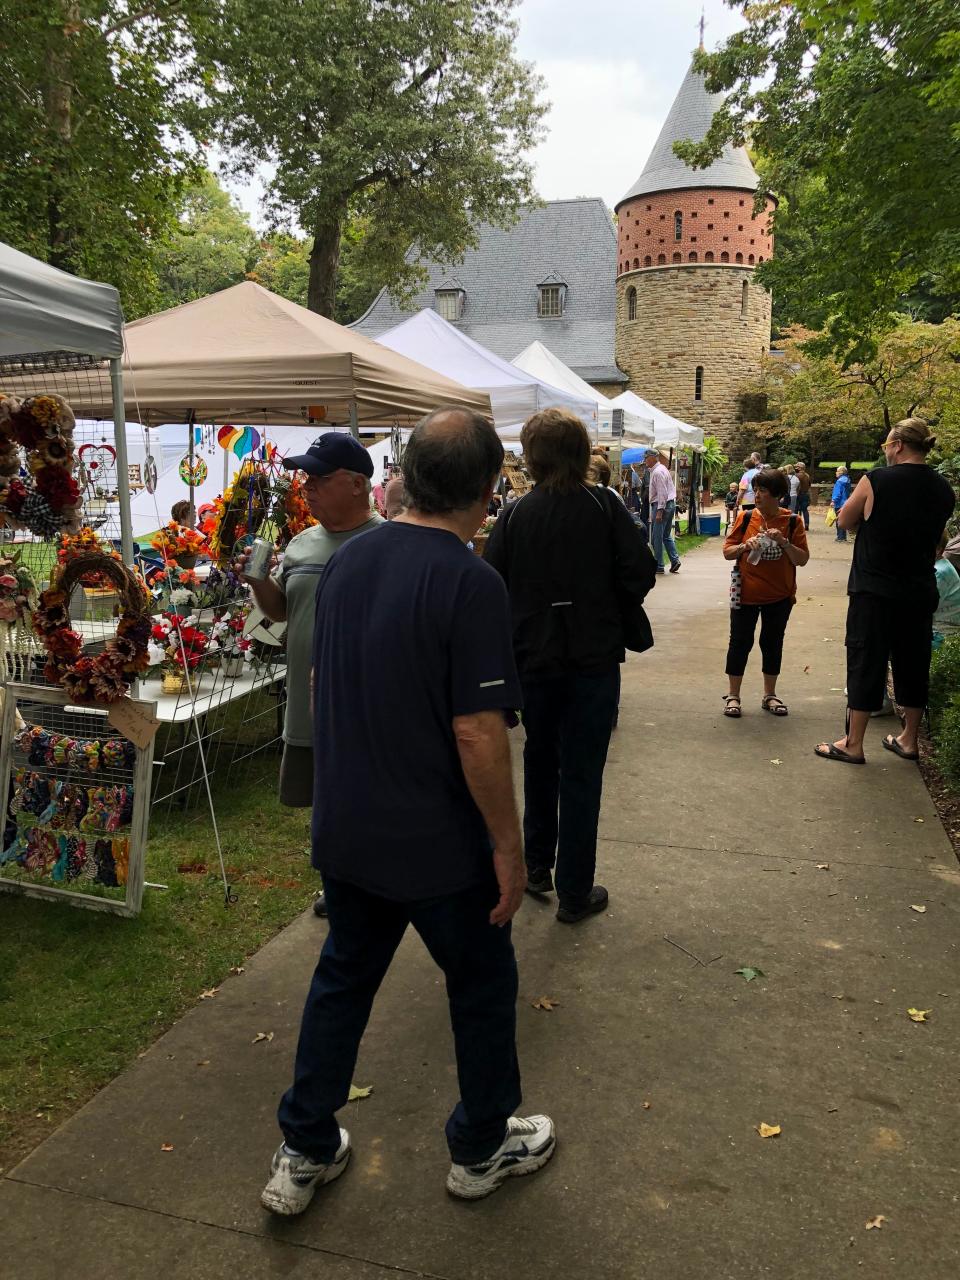 Patrons browse by booths in front of the museum at Audubon State Park during the 2021 Arts & Crafts Festival sponsored by the Henderson Lions Club.